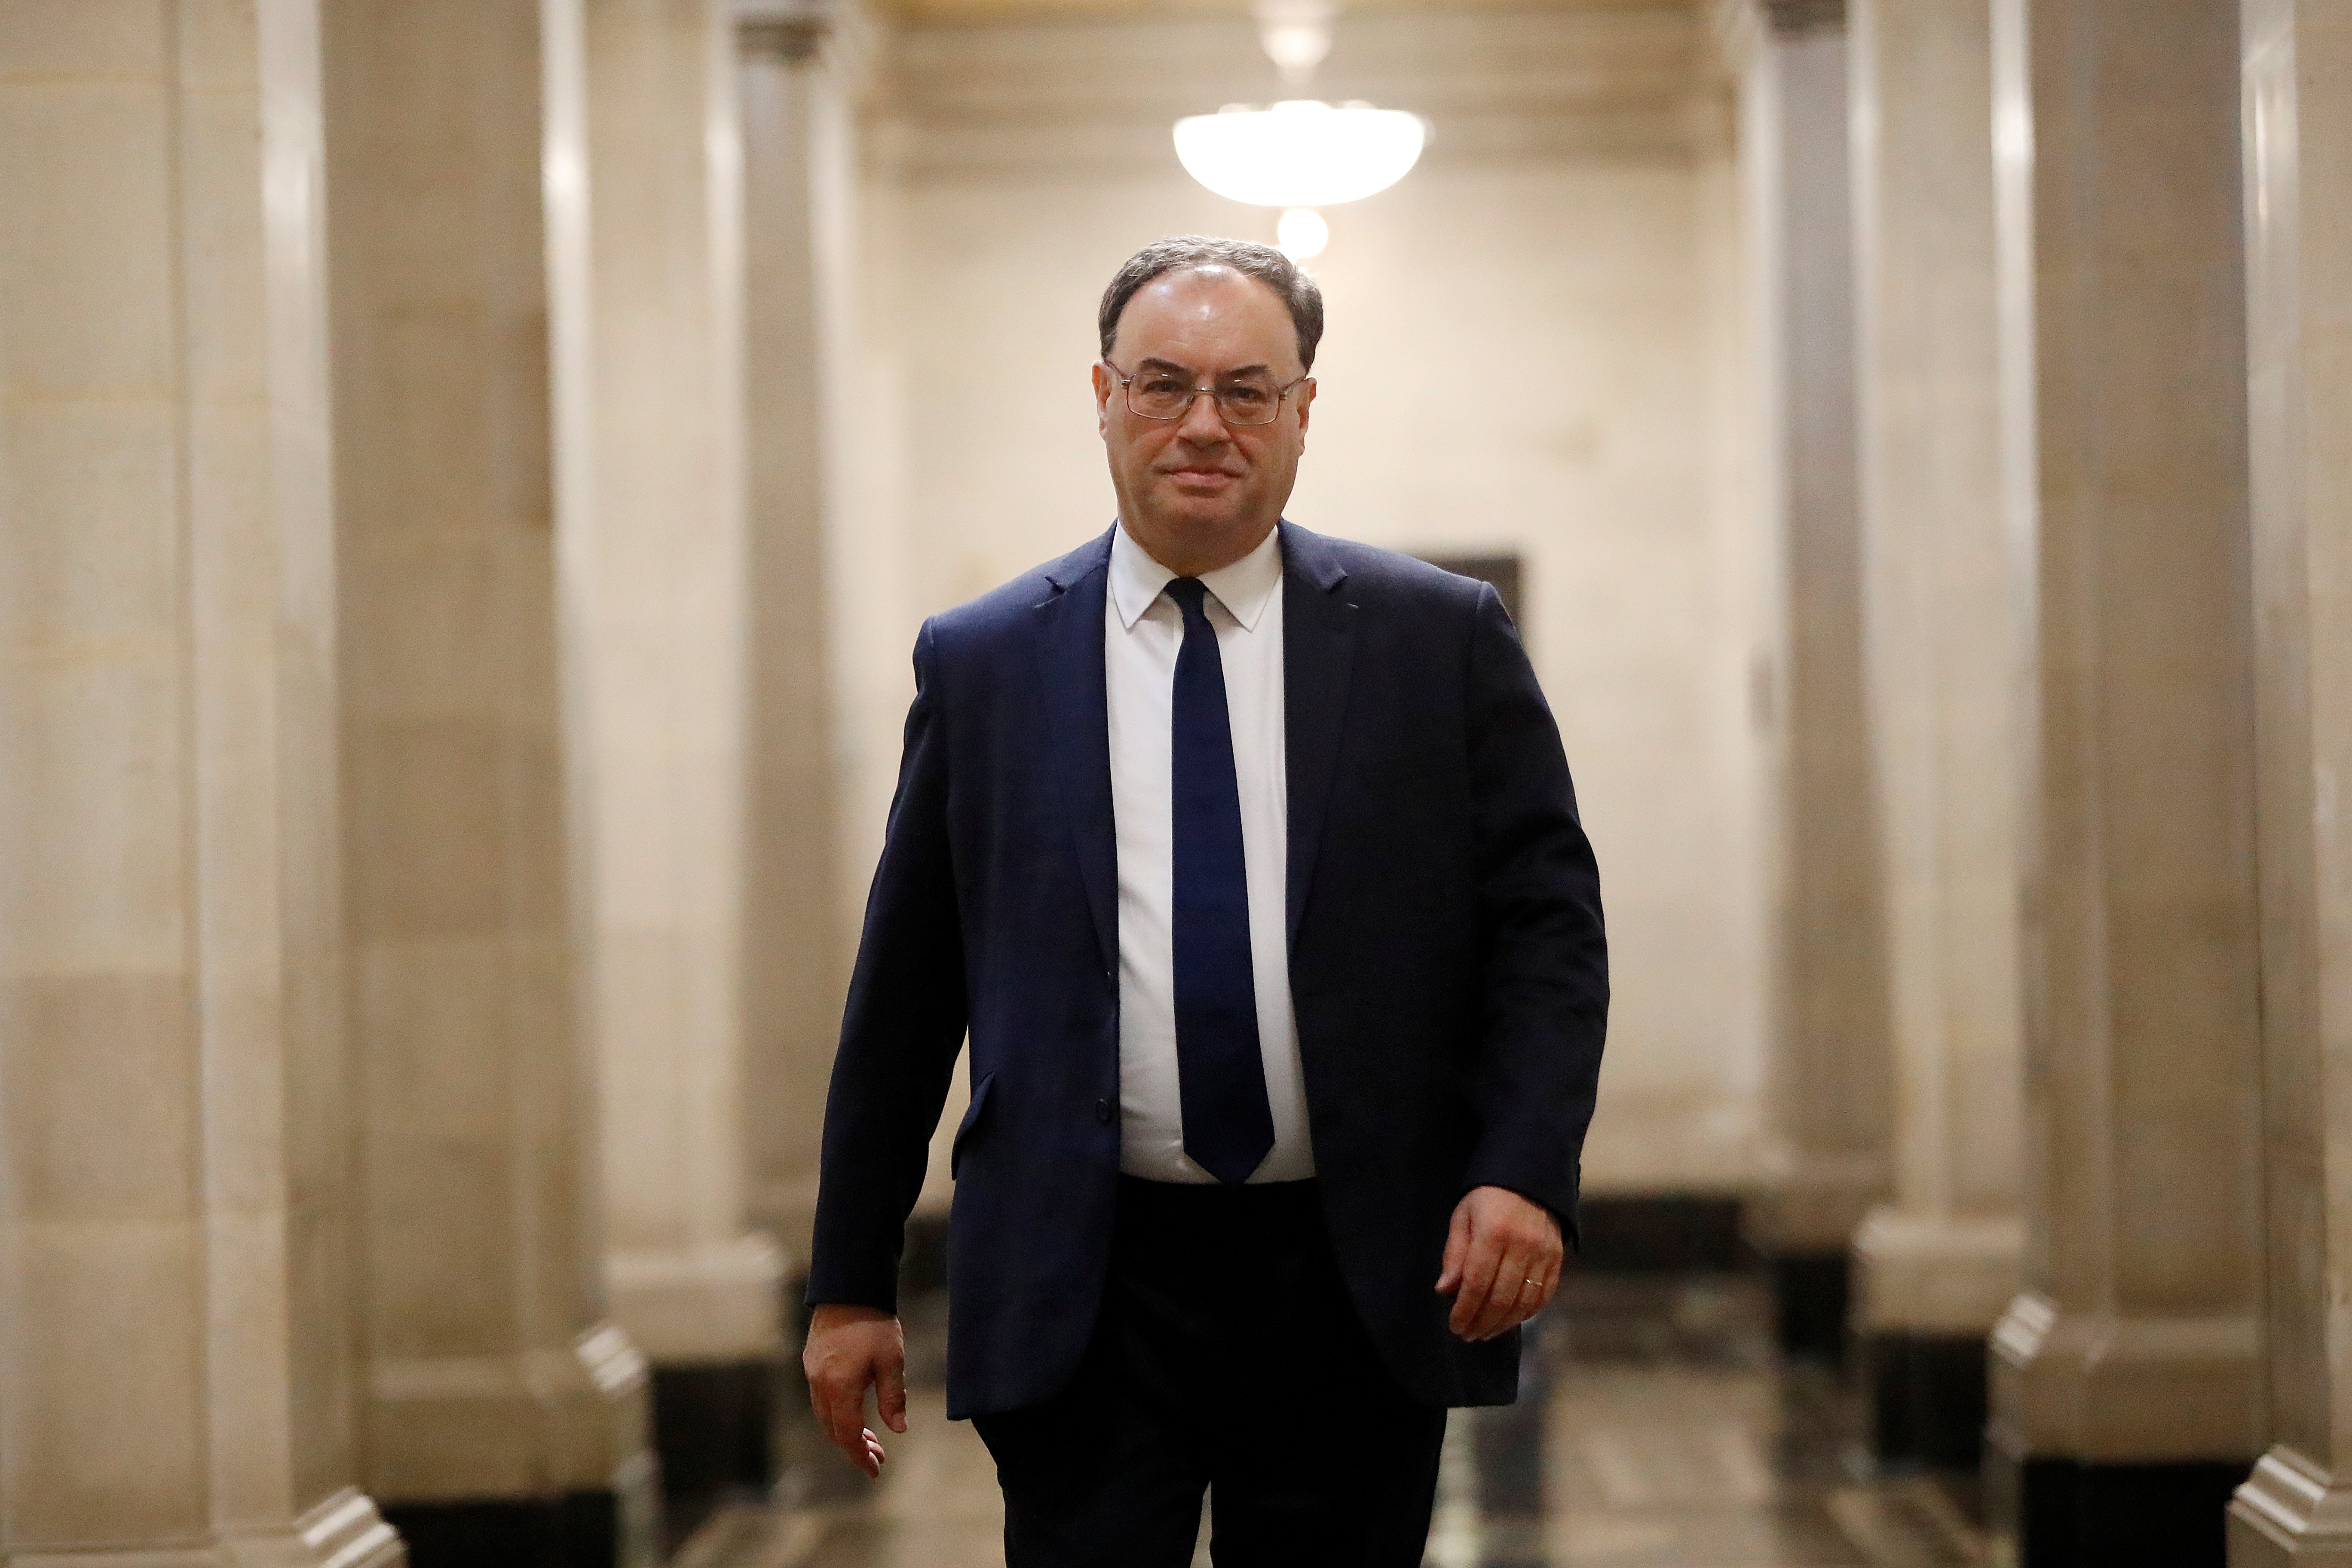 Andrew Bailey worries the UK will become an EU ‘rule taker’